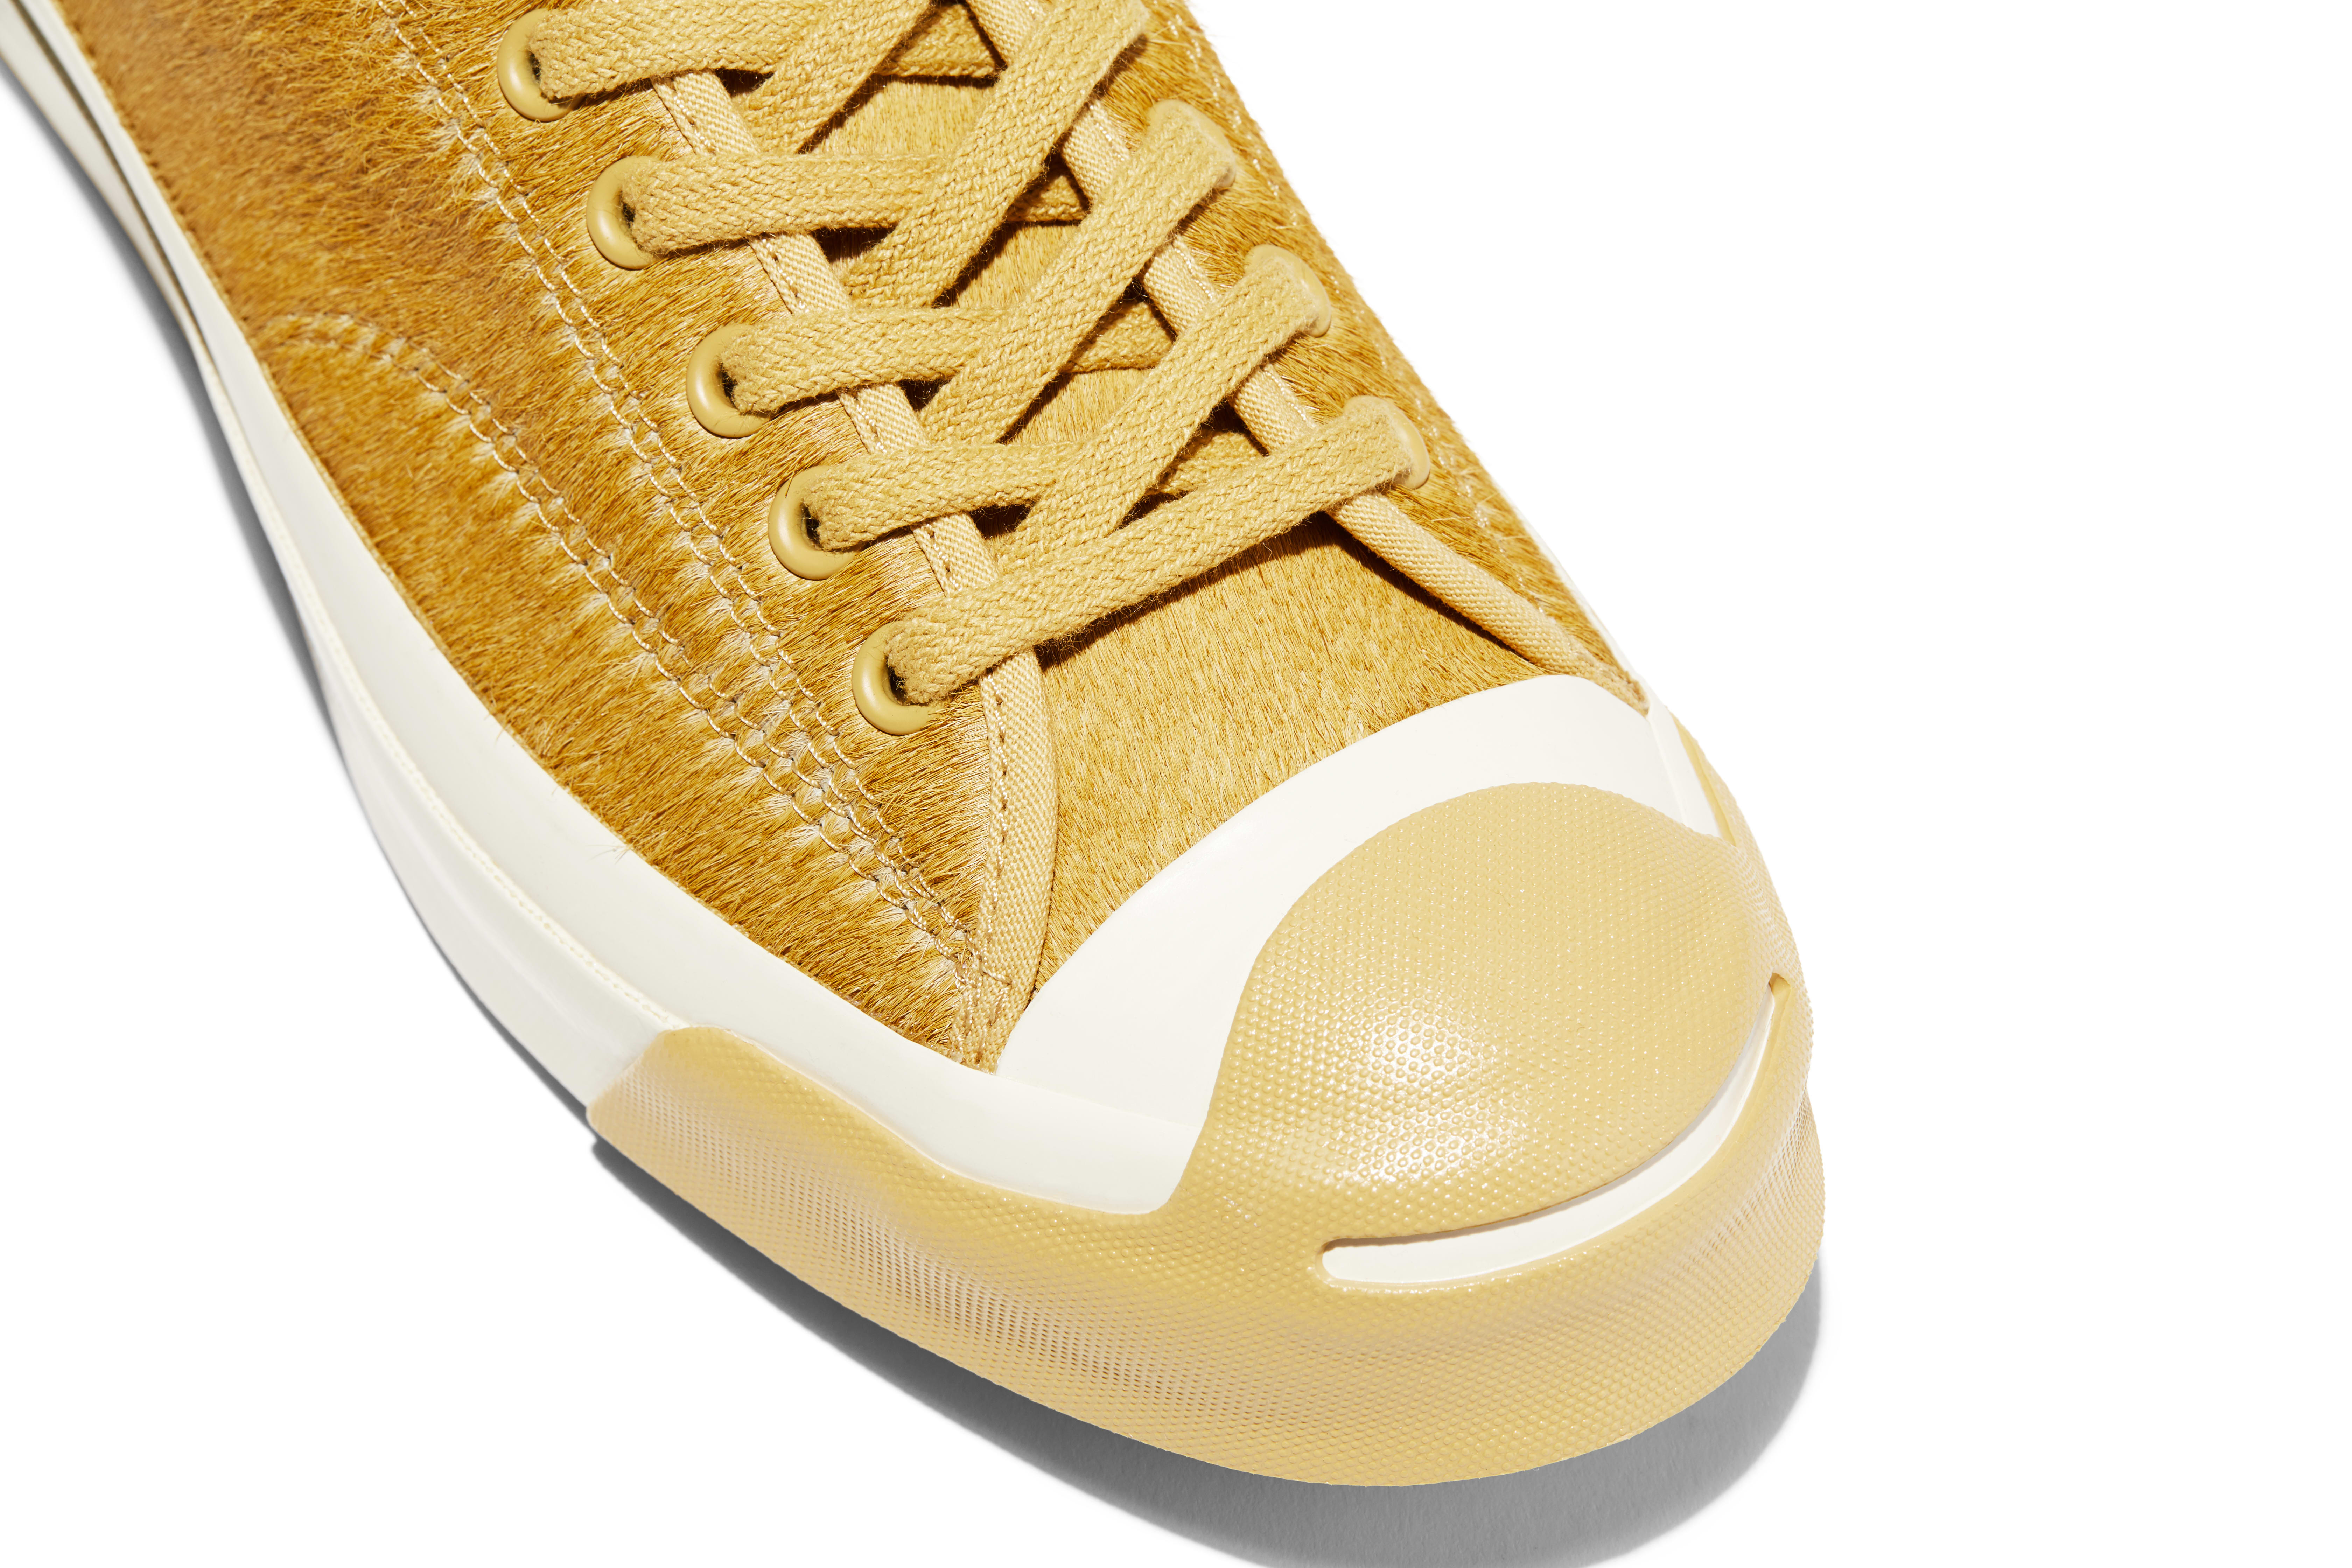 BornxRaised x Converse Jack Purcell &#x27;Camel&#x27; (Toe)